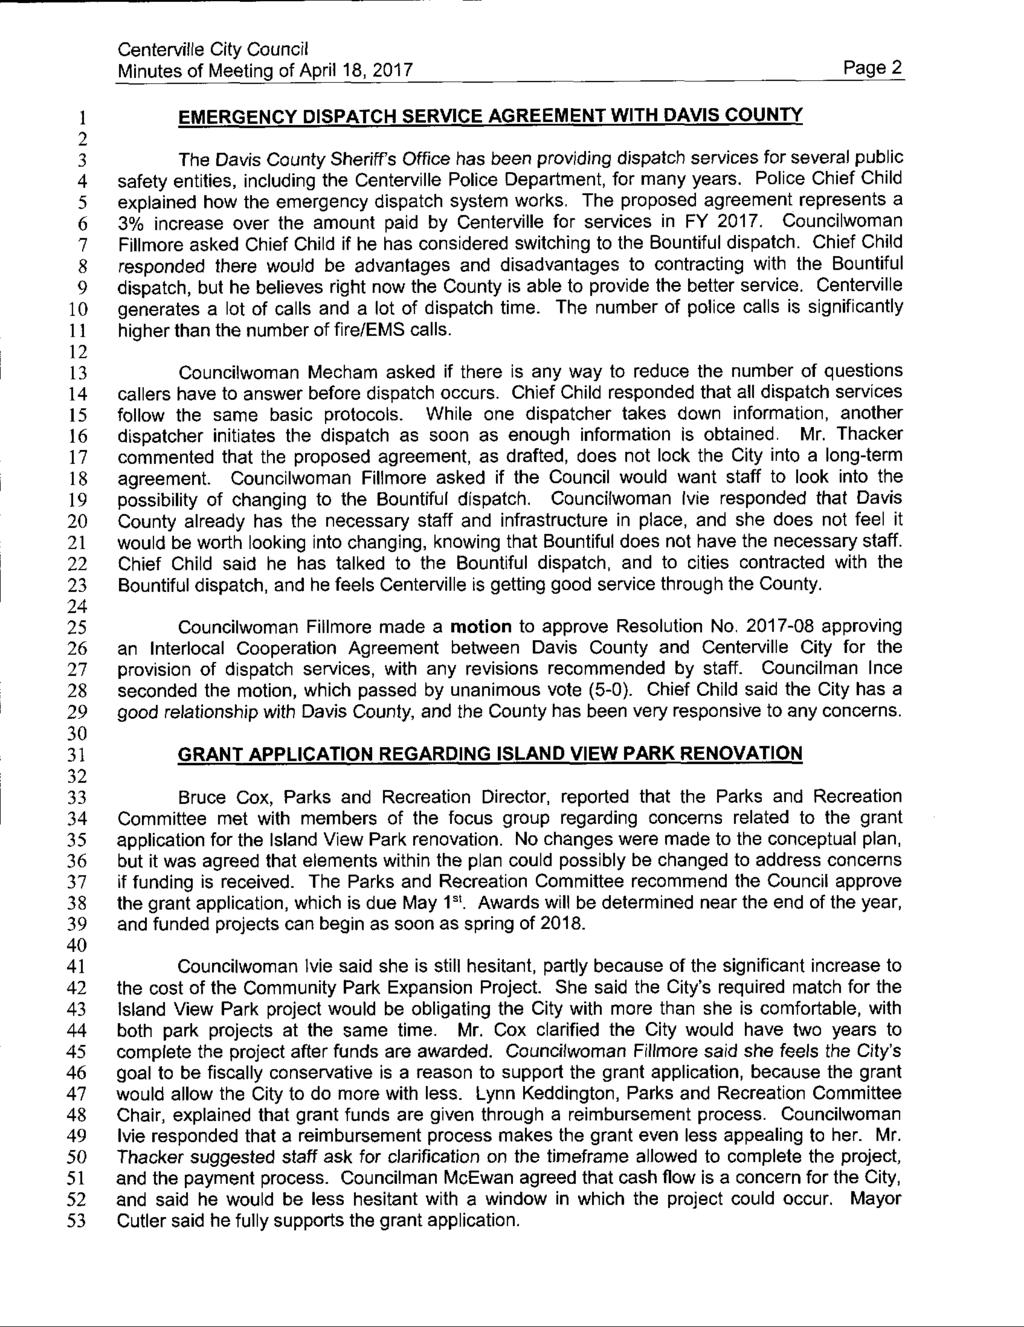 Centerville City Council Minutes of Meeting of April 18, 2017 Page 2 EMERGENCY DISPATCH SERVICE AGREEMENT WITH DAVIS COUNTY 3 The Davis County Sheriff's Office has been providing dispatch services